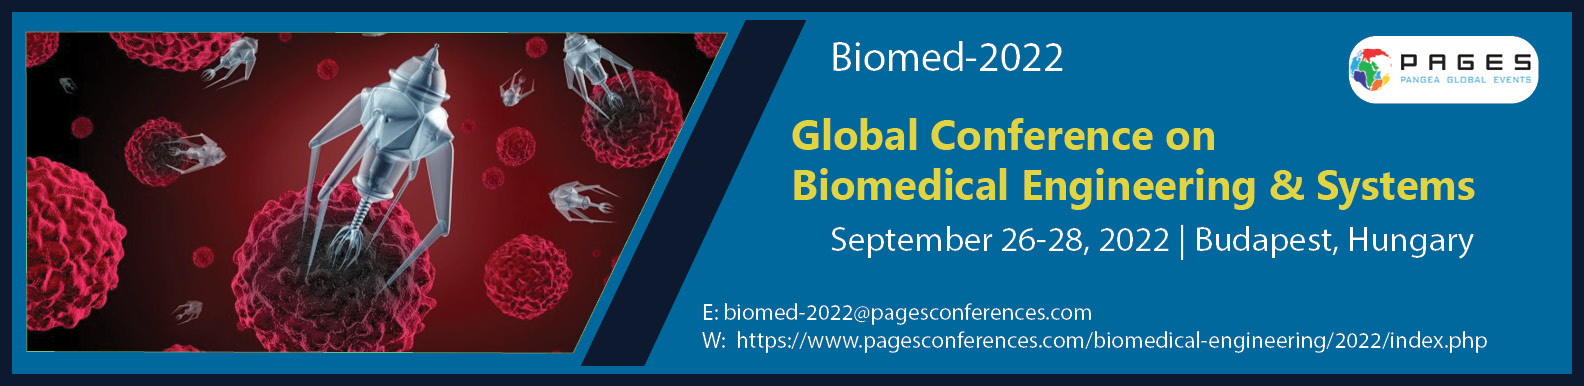 Global Conference on Biomedical Engineering & Systems